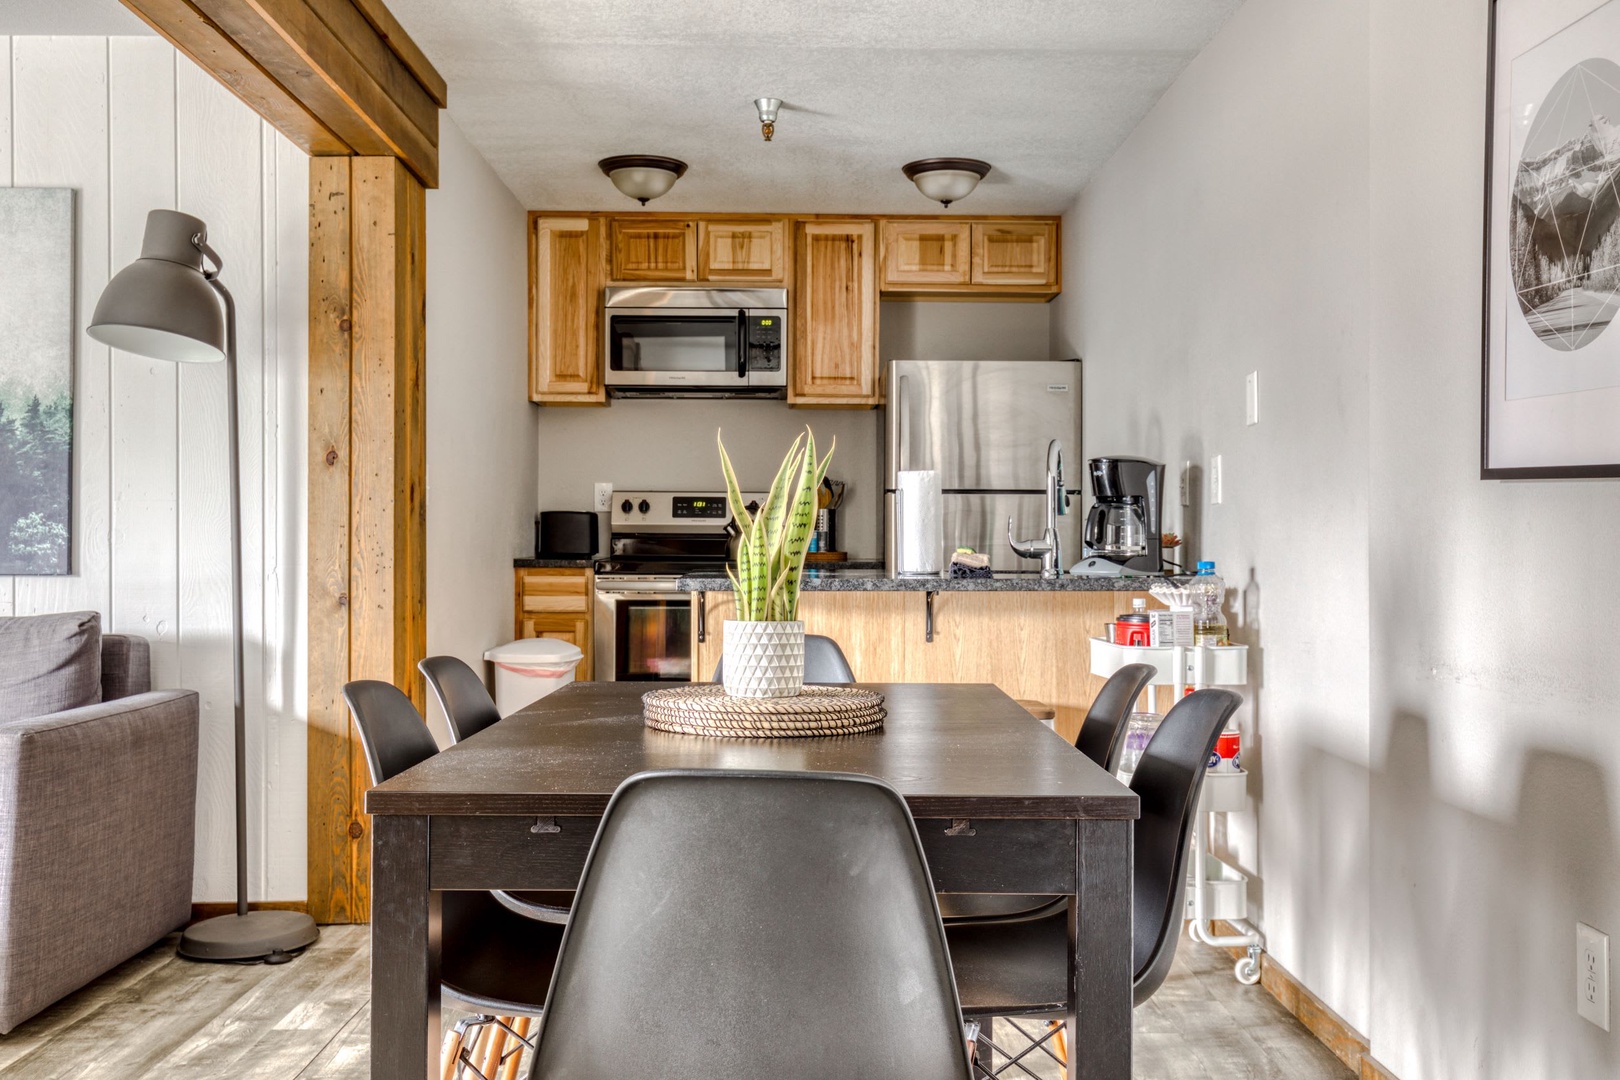 Government Camp Vacation Rentals, Mt Hood Views Condo #304 - Cute kitchen and dining area together